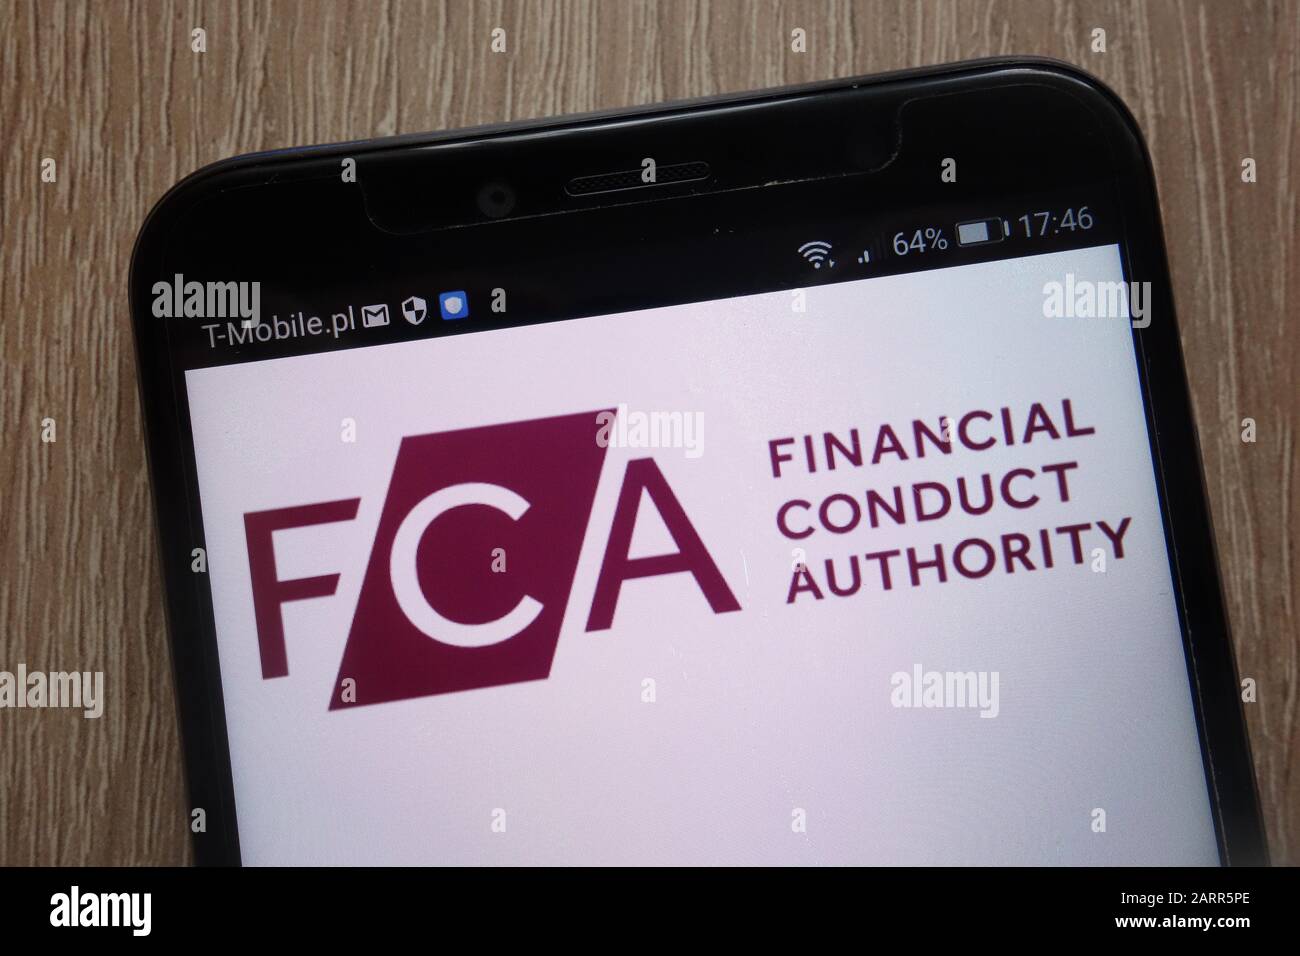 Financial Conduct Authority logo displayed on a modern smartphone Stock Photo